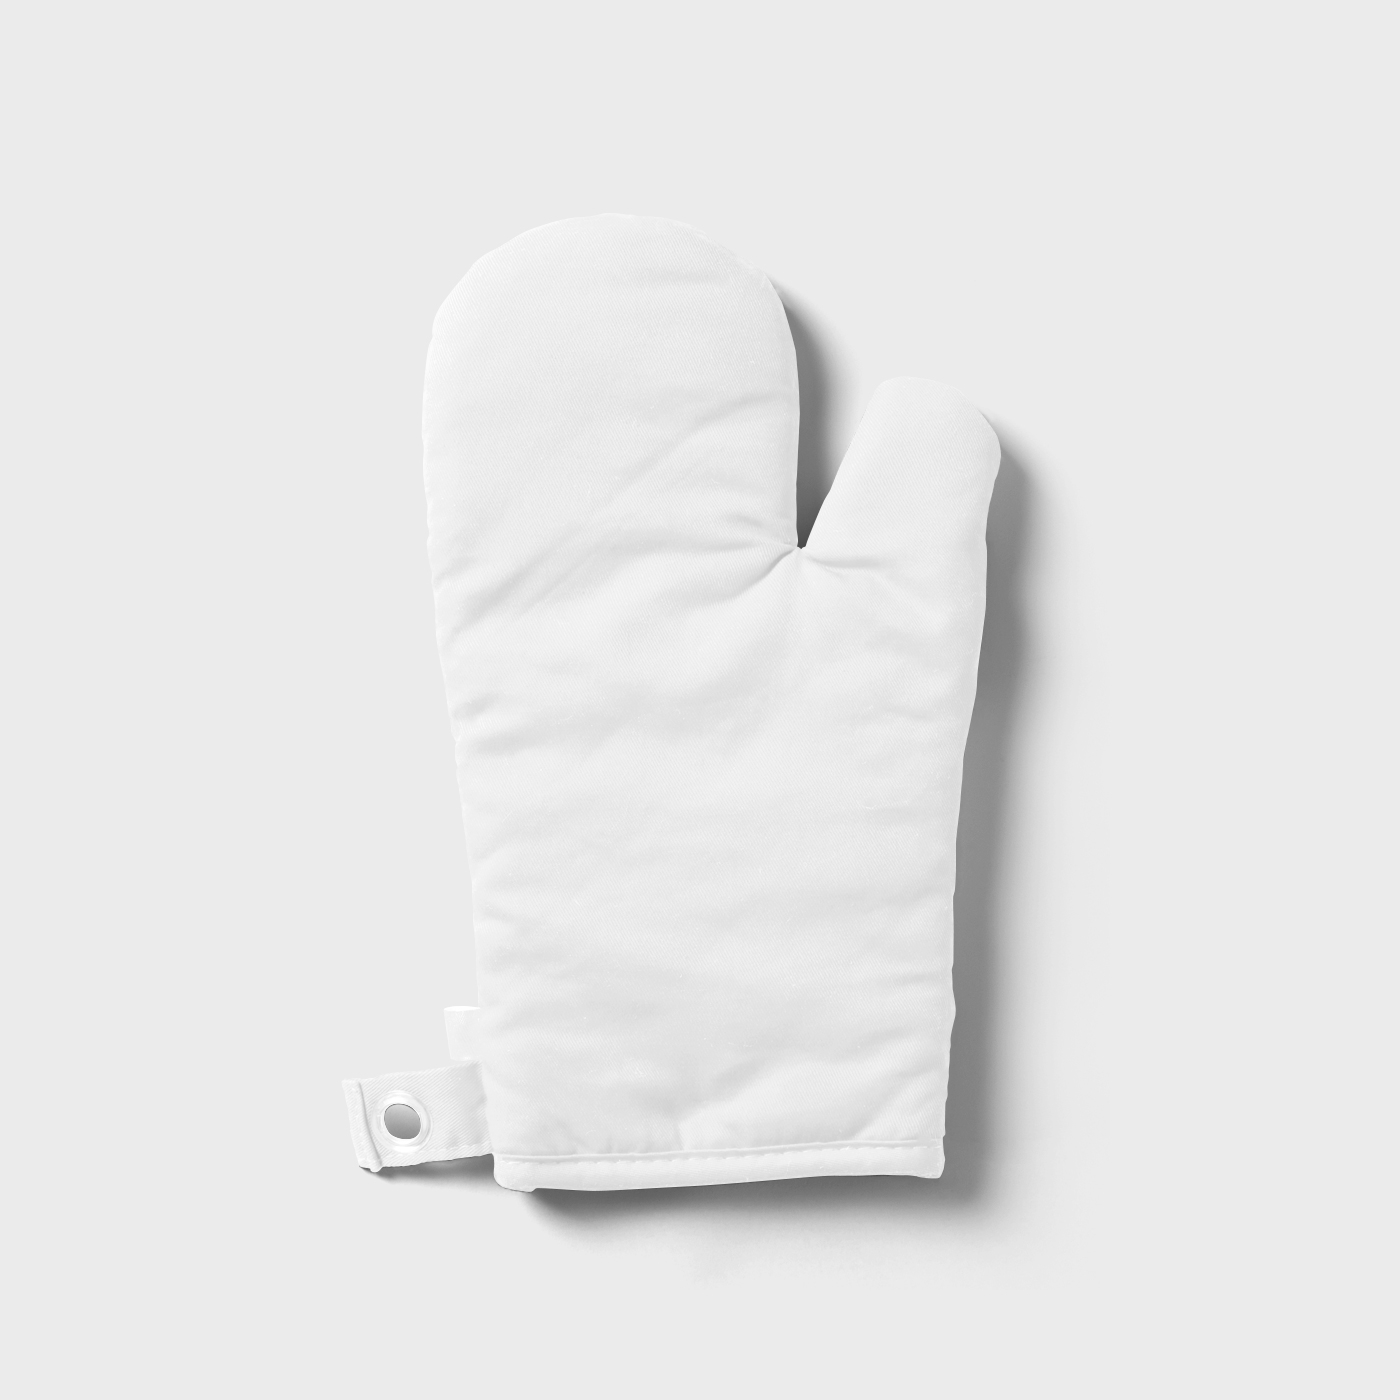 Top View of a Classic Oven Glove Mockup FREE PSD